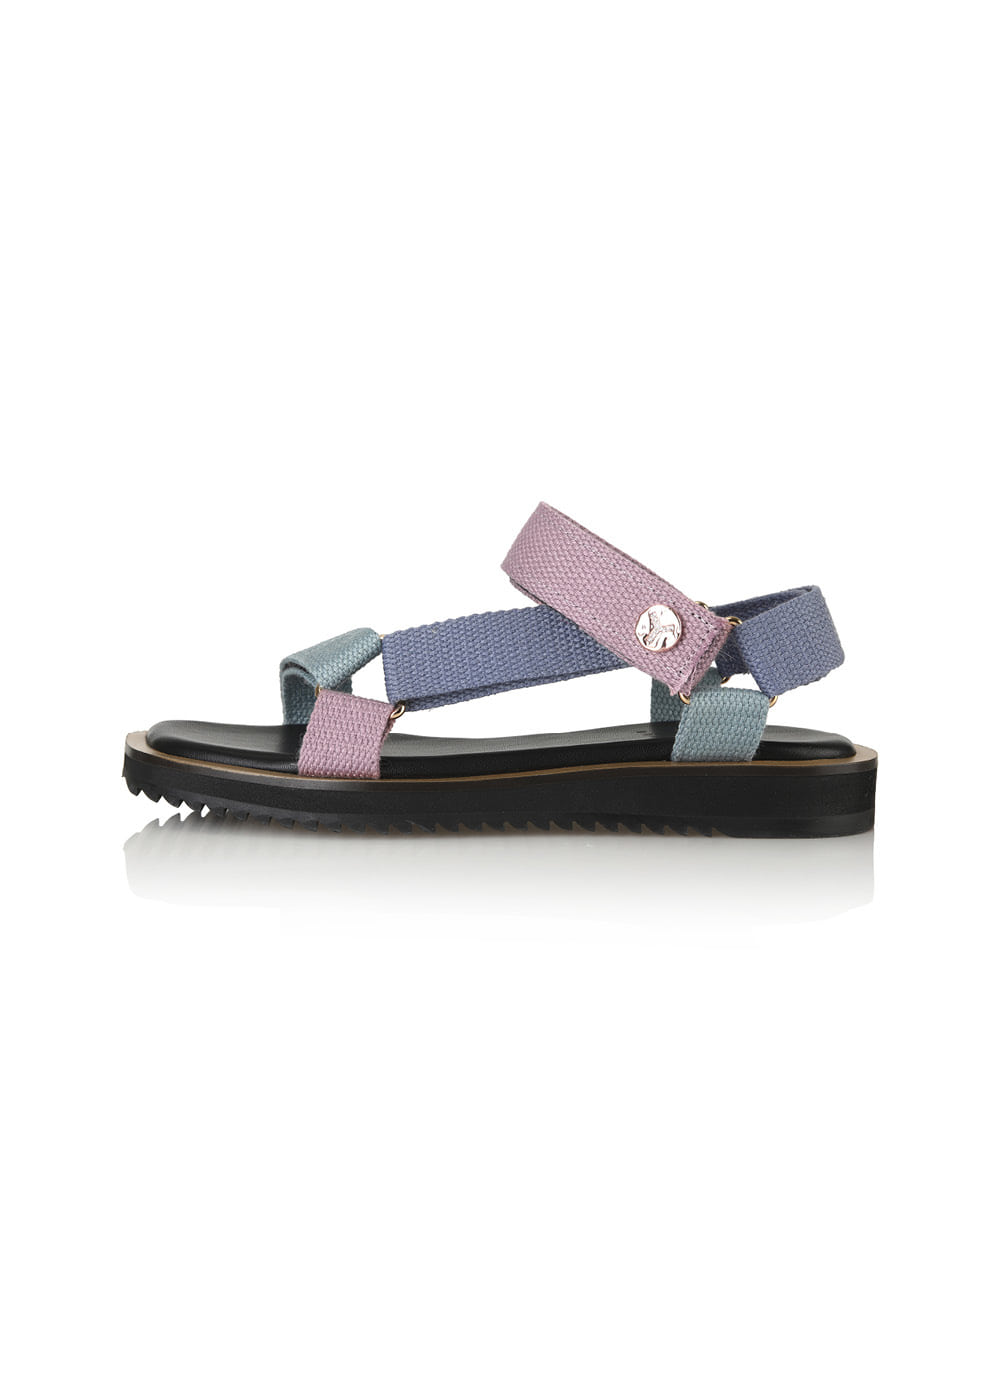 Y.02 Moly Strap sandals / YY20A-S51 / 4 colors